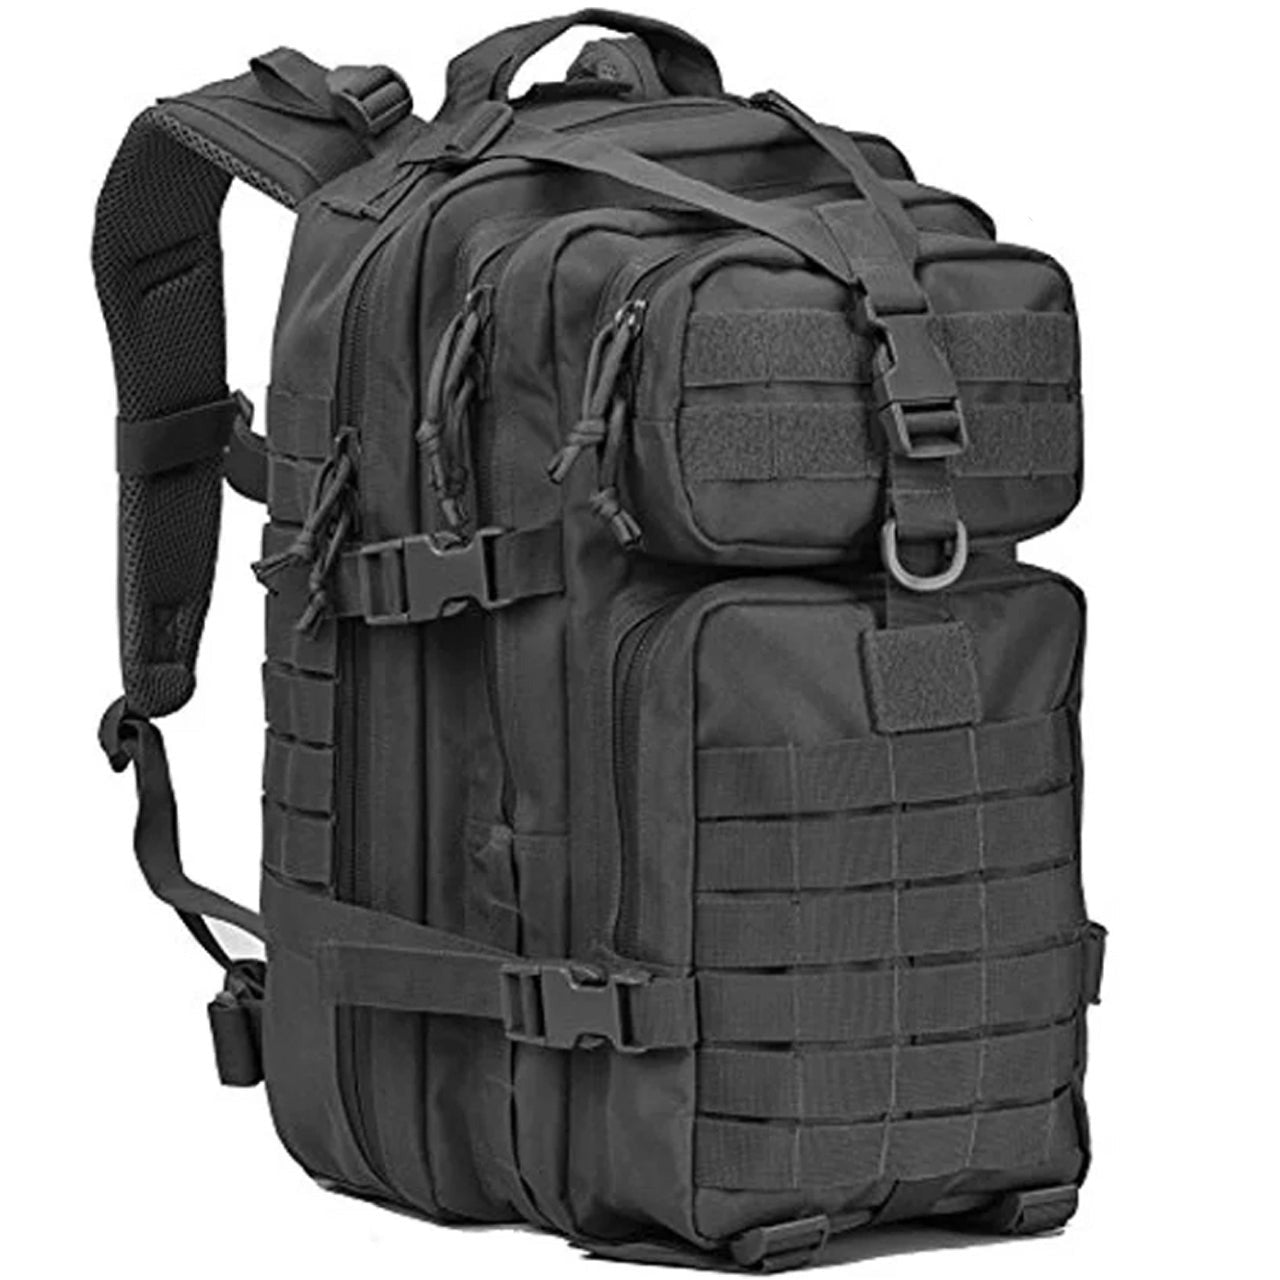 Military Tactical Backpack 3 Day Assault Pack Molle 35L Black or Khaki ...